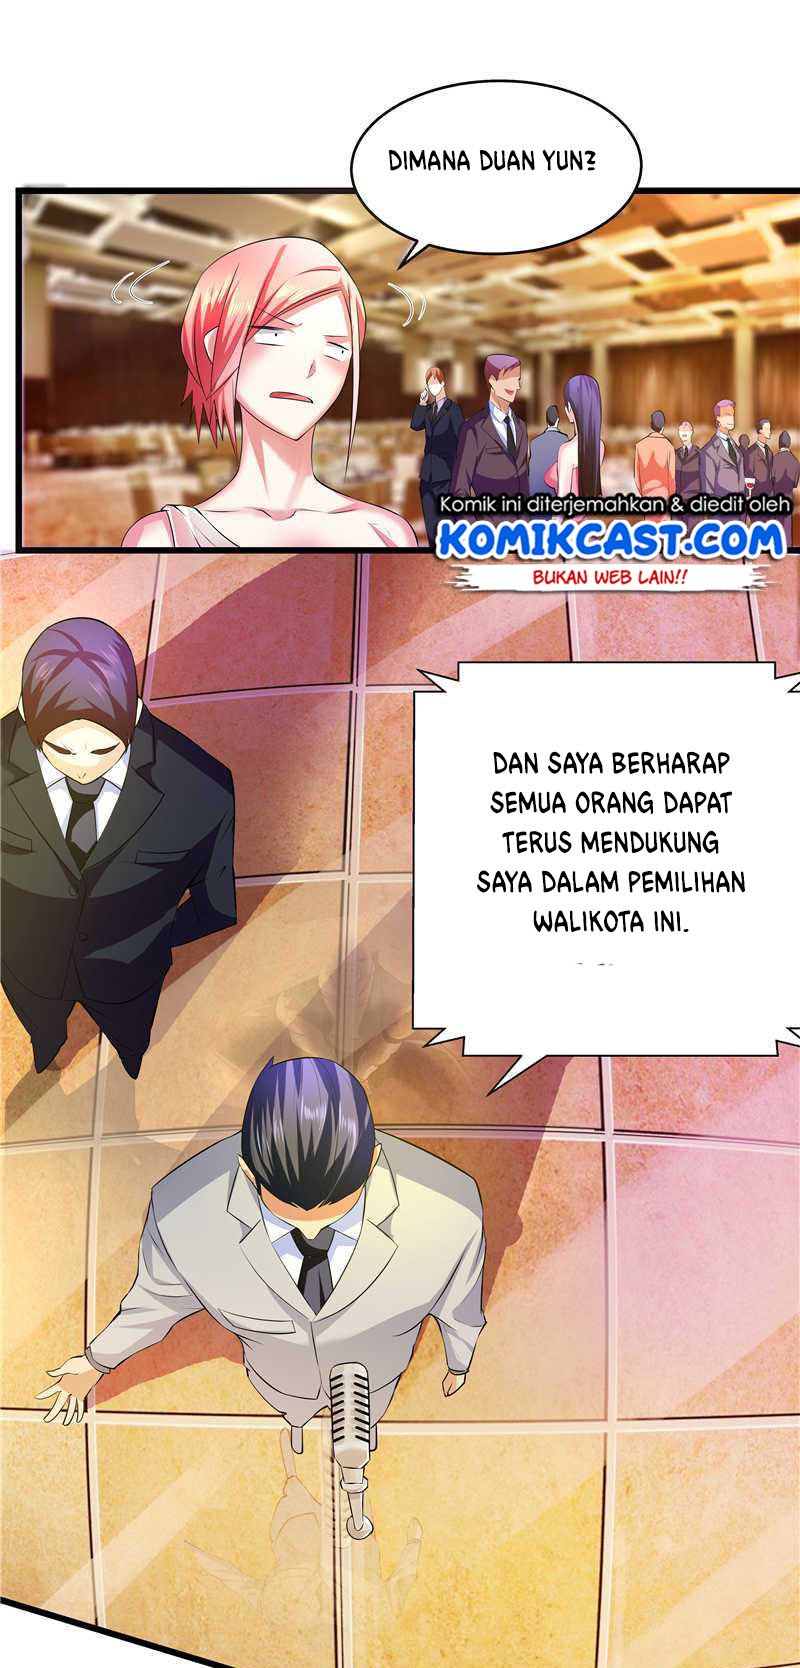 First Rate Master Chapter 19